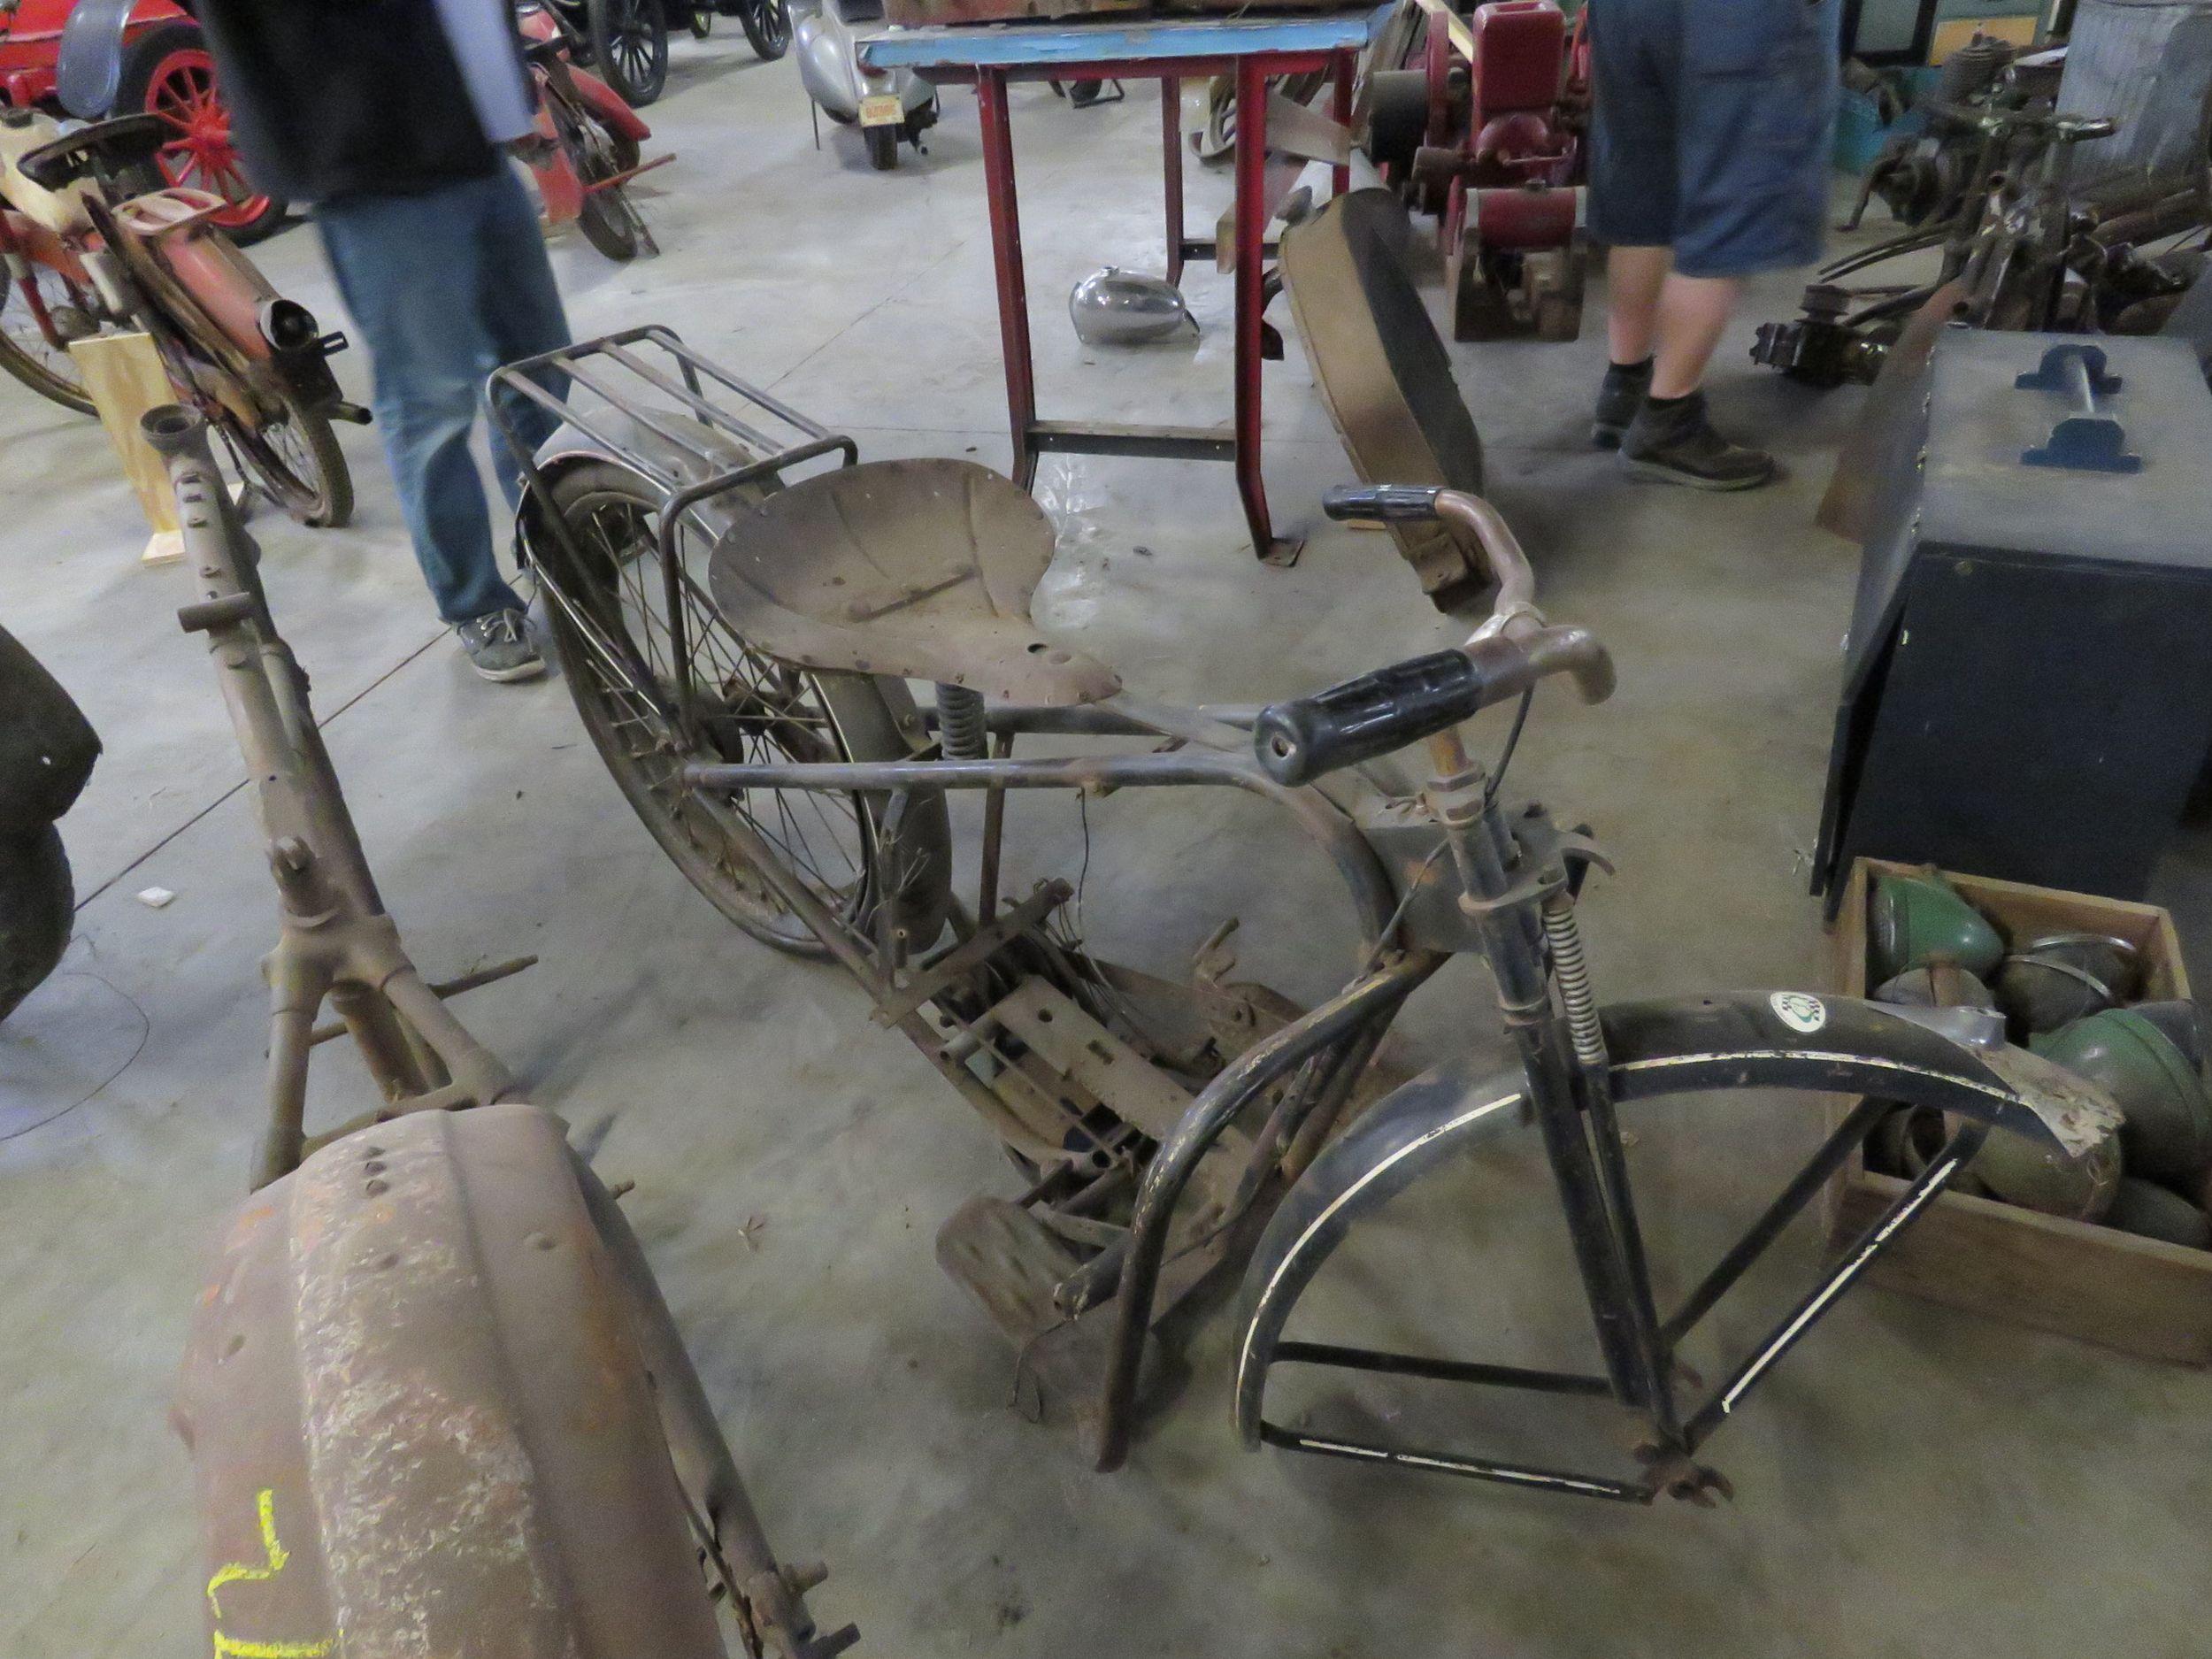 Vintage Servicycle Motorcycle Project